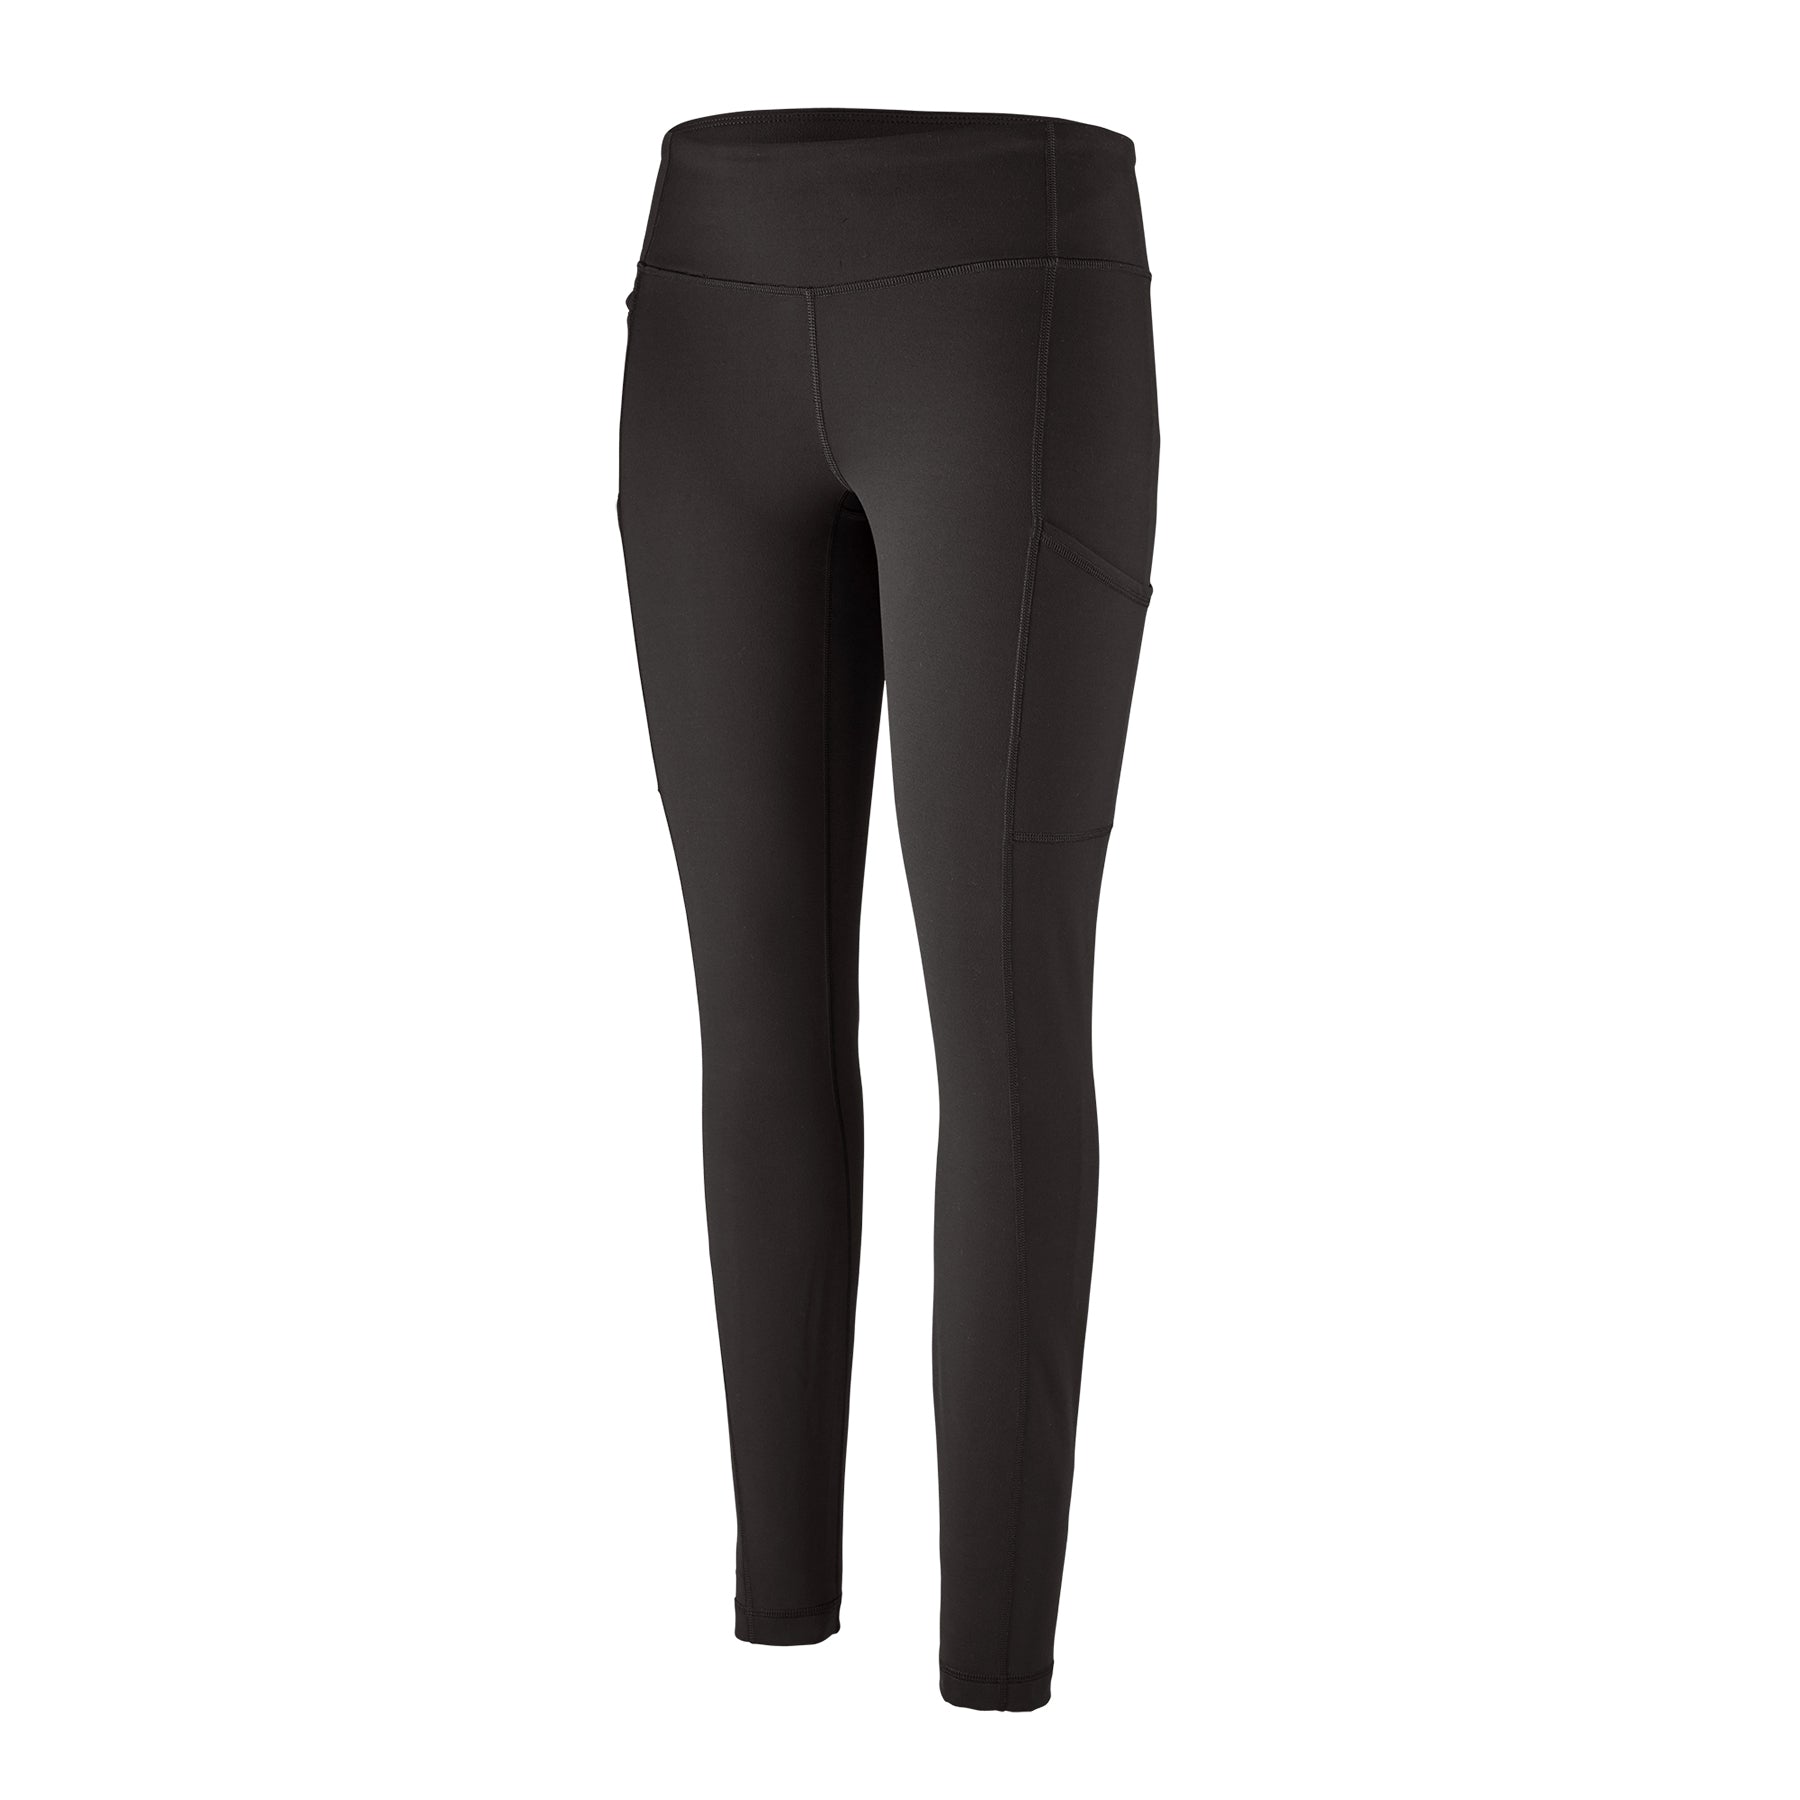 Patagonia Women's Pack Out Tights - Idaho Mountain Touring